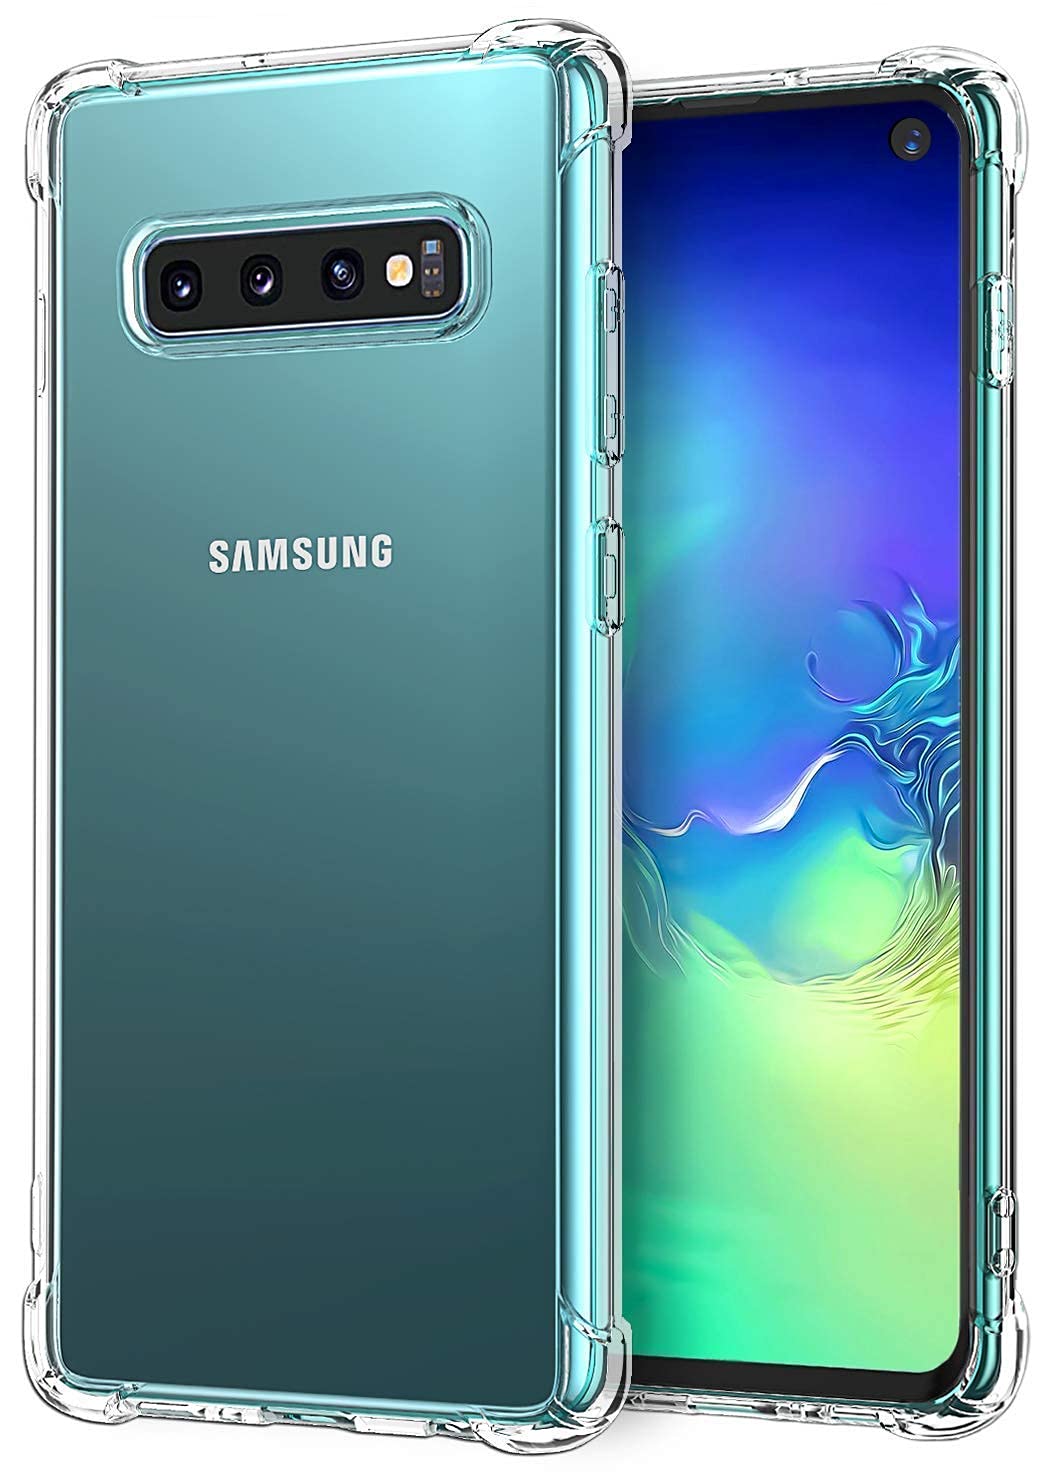 Samsung Galaxy S10 Transparent back Cover (Acrylic)